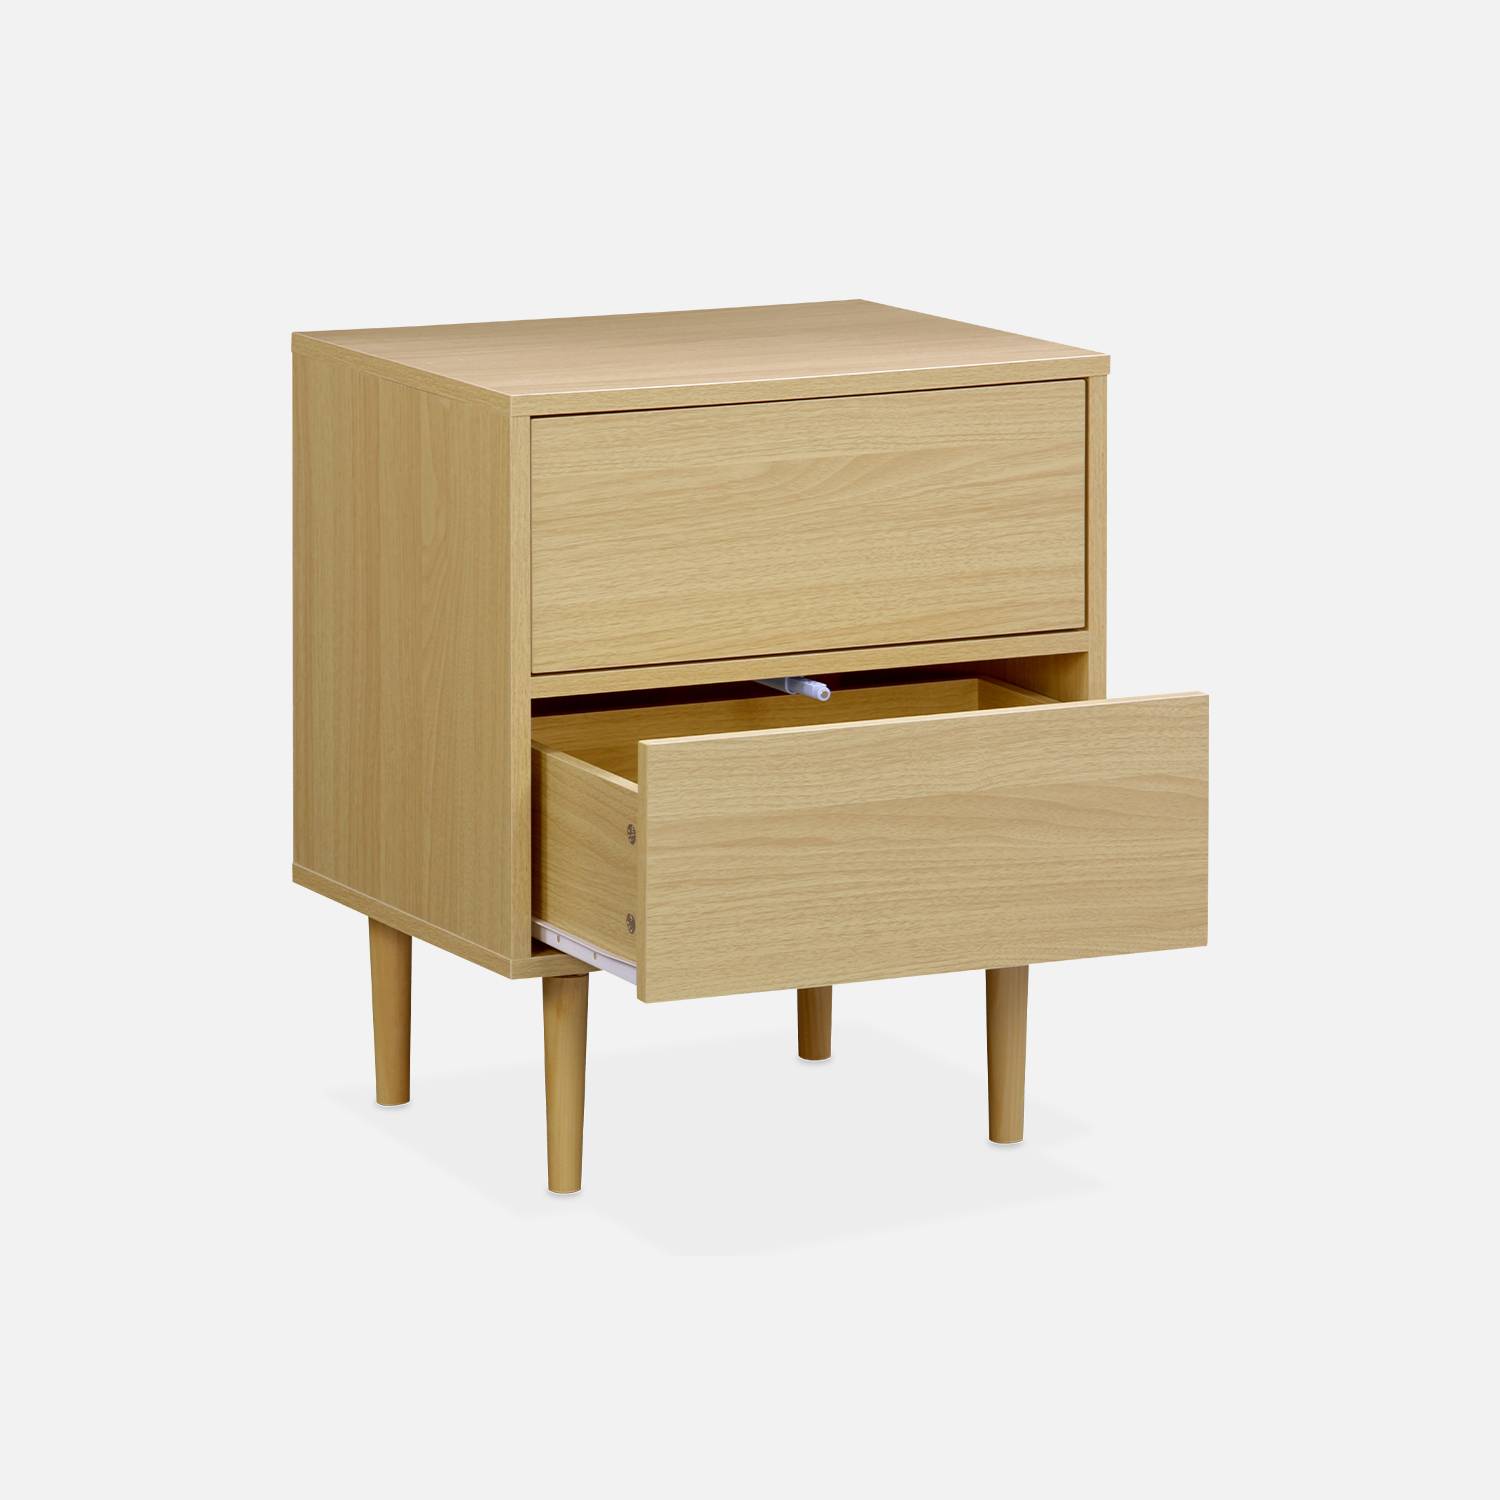 Wood-effect bedside tables with two drawers, 48x40x59cm - Mika - Wood colour Photo5